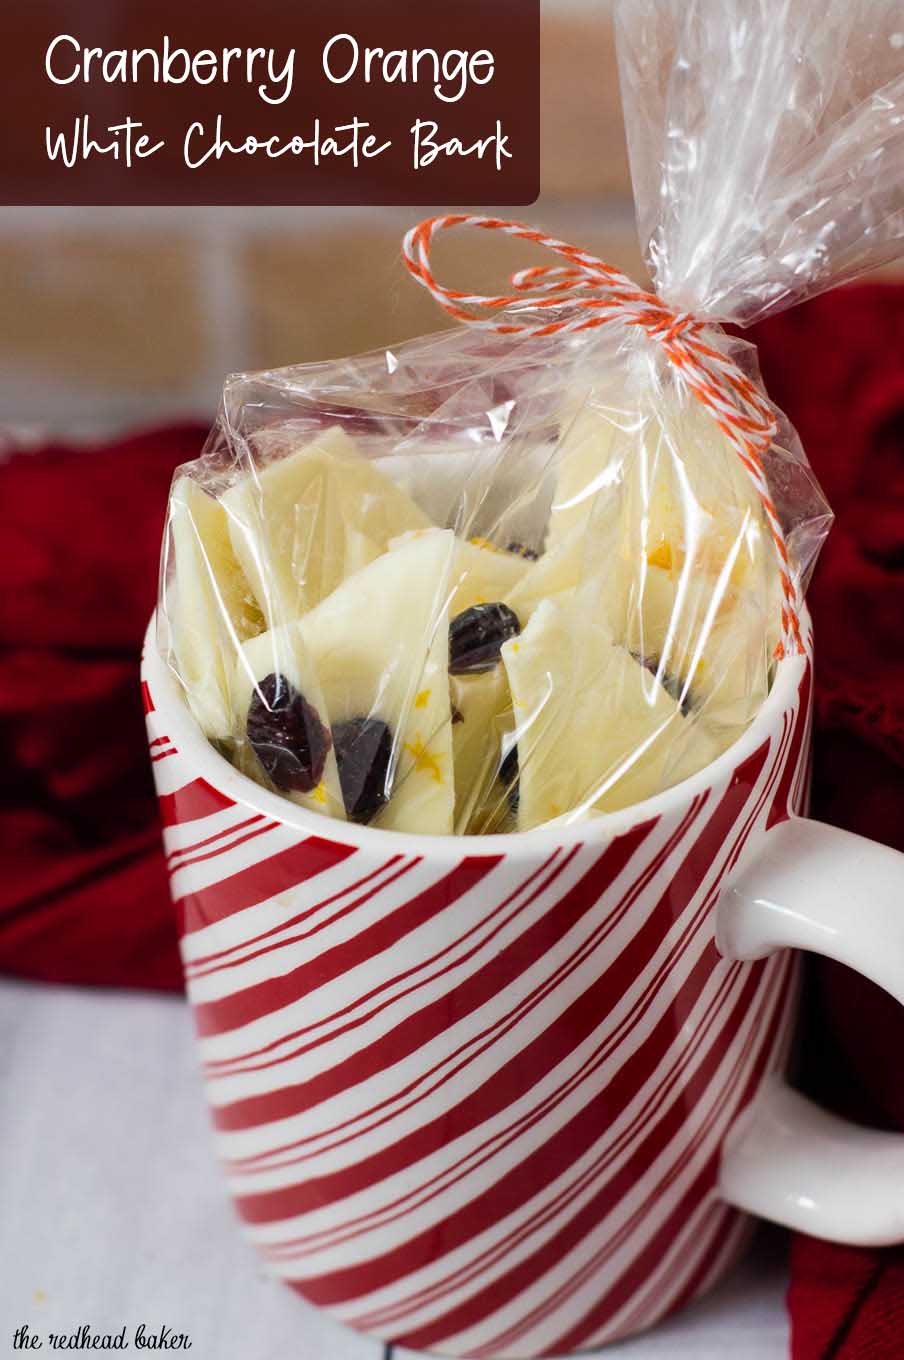 Have a lot of holiday parties to attend? Homemade cranberry-orange bark gives your wallet a break, and provides your hostess with a delicious treat. #FoodGifts